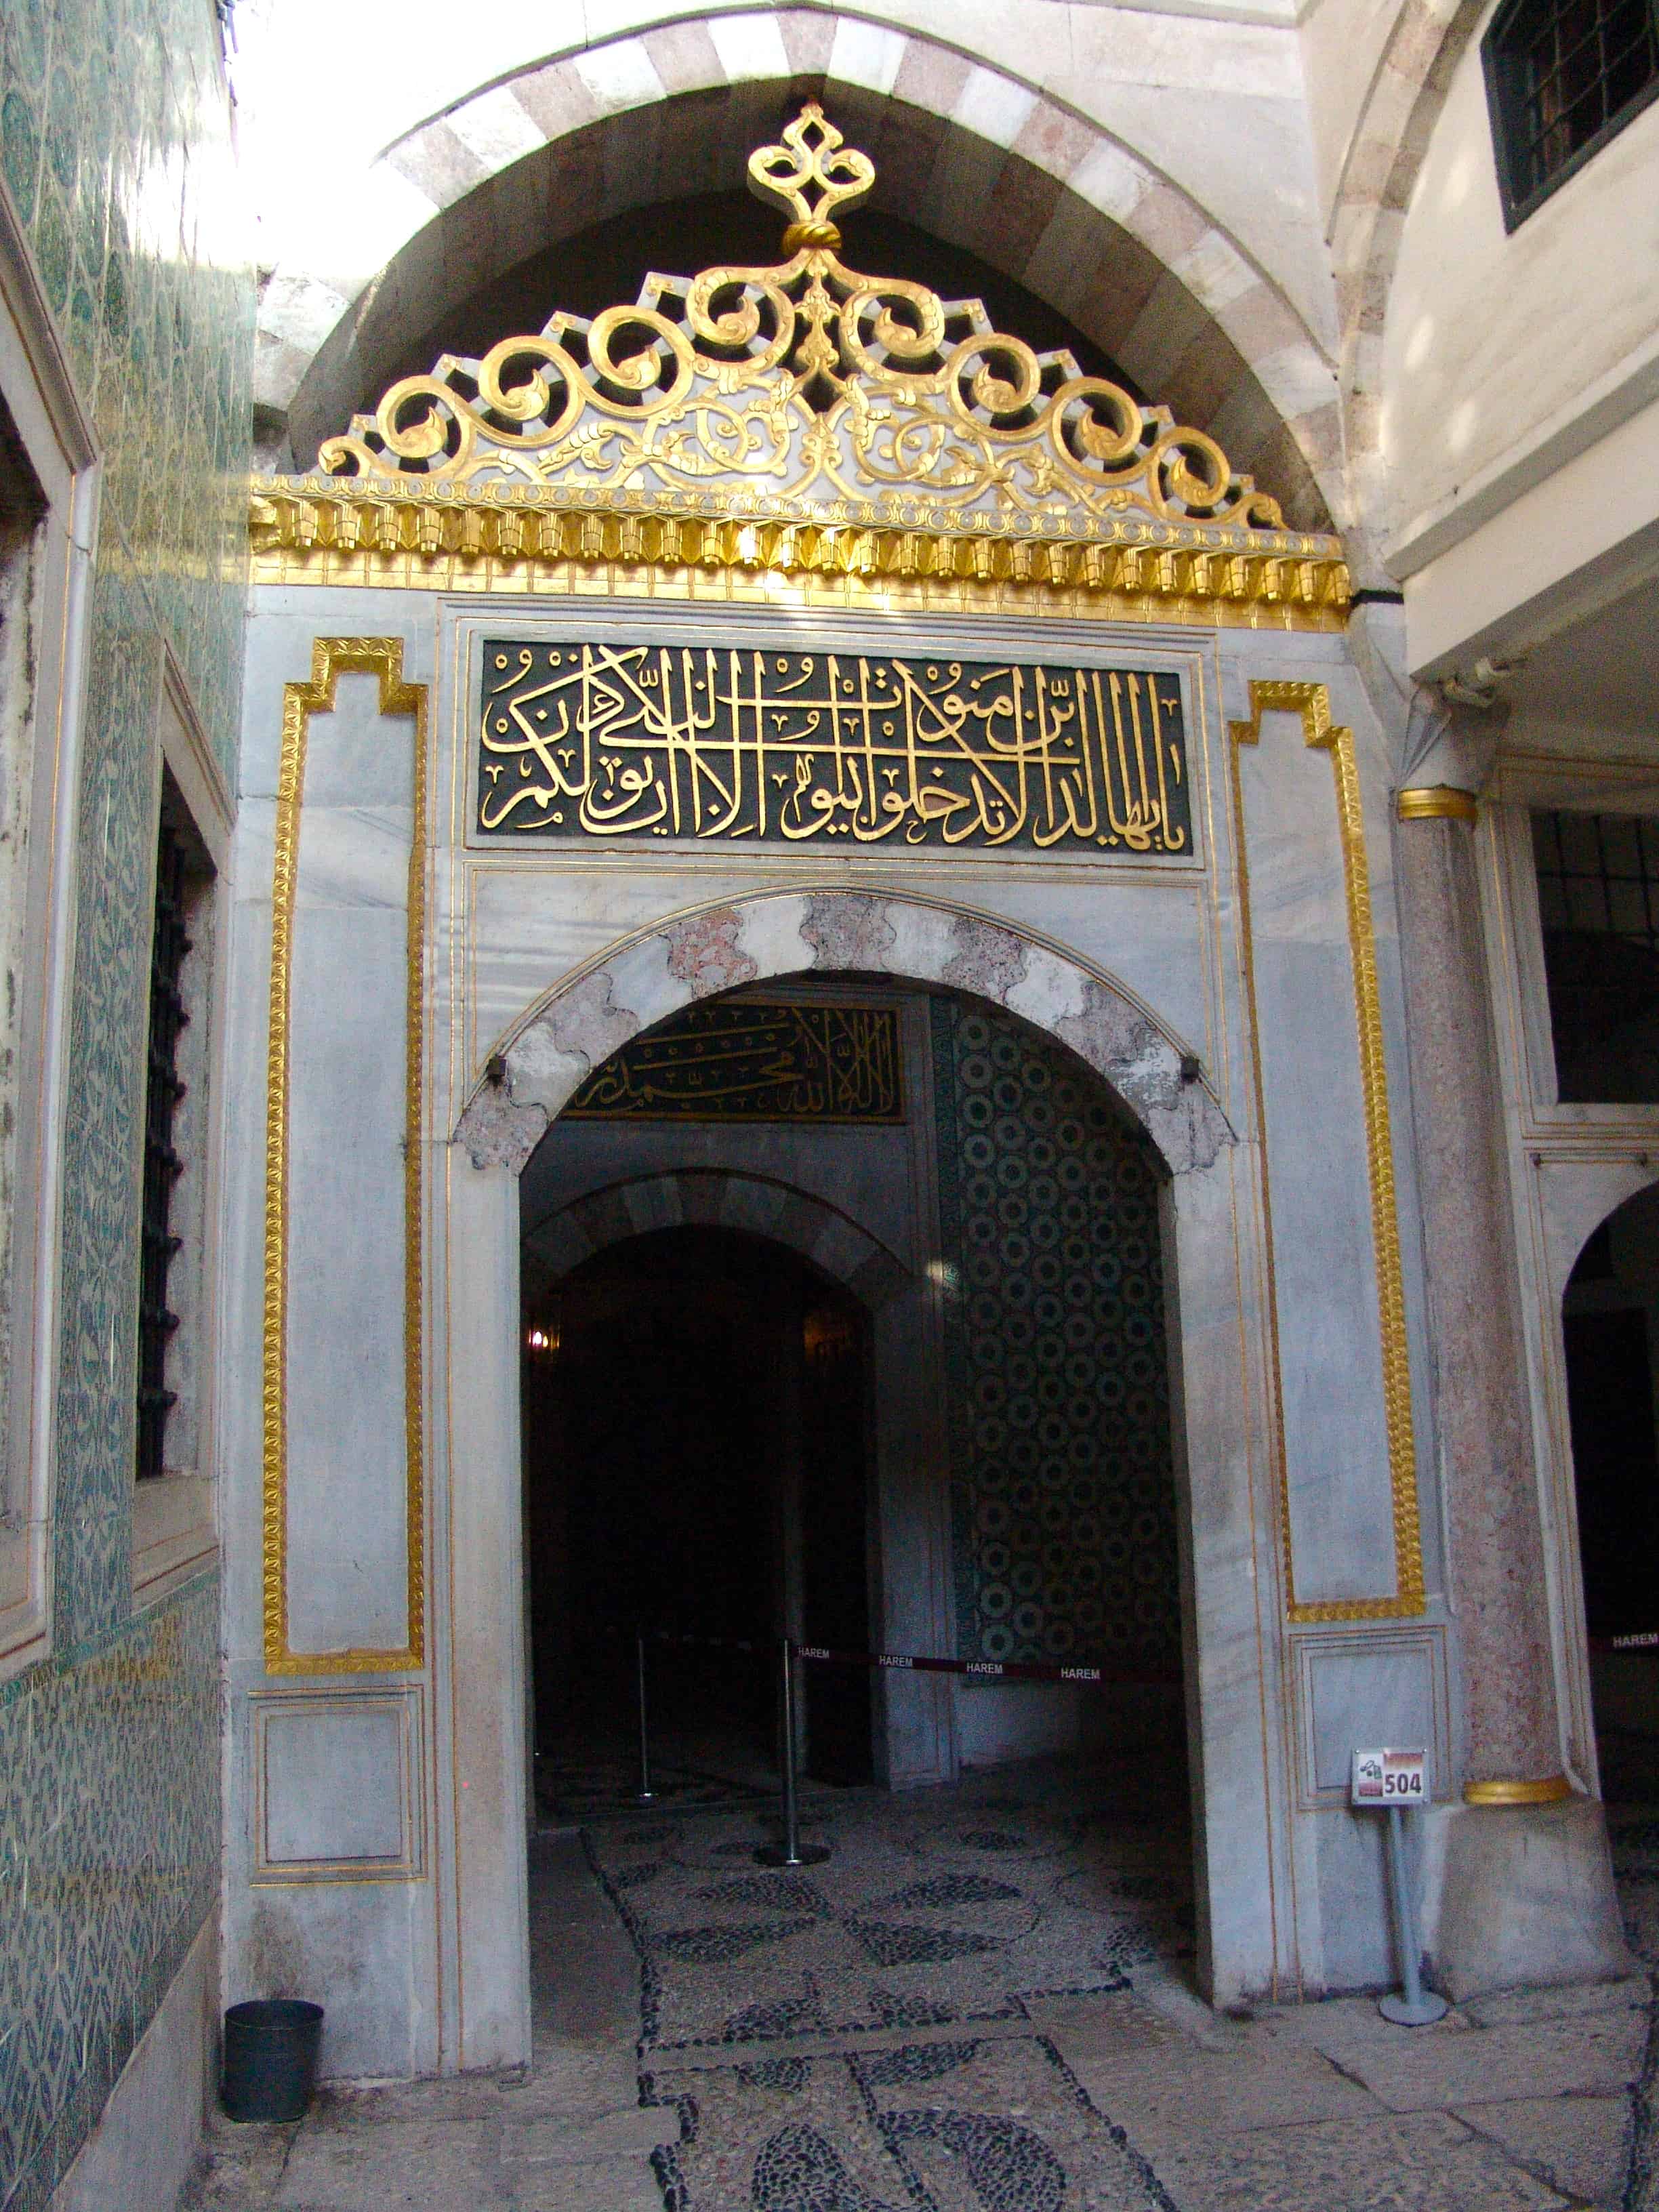 Main Gate in the Imperial Harem at Topkapi Palace in Istanbul, Turkey